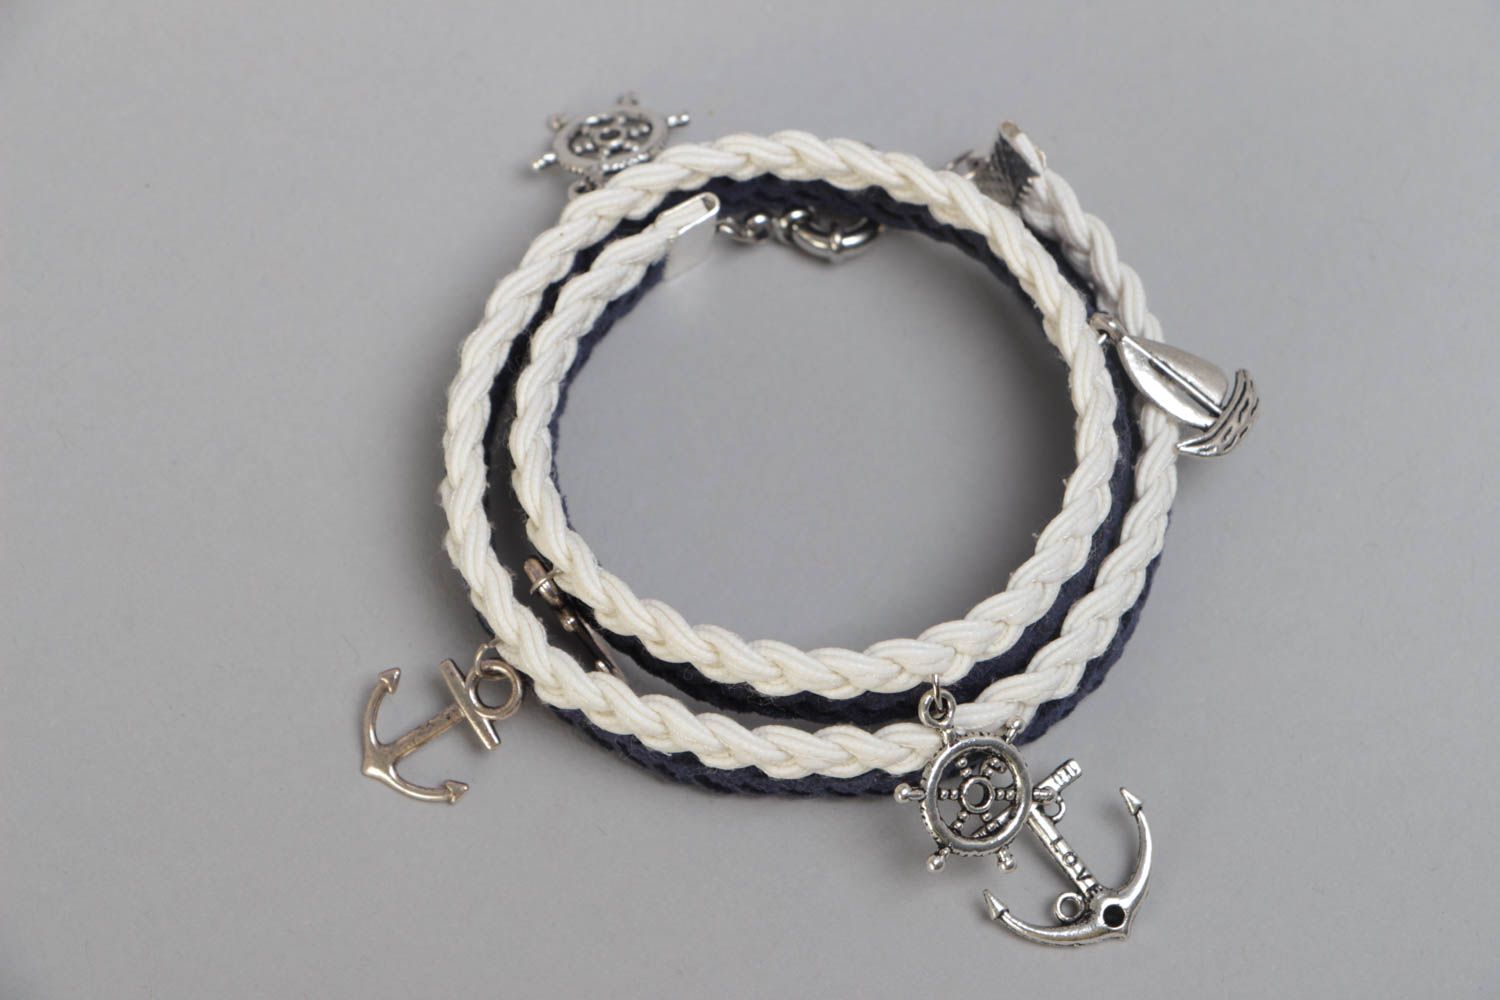 Handmade multi row wrist bracelet woven of suede cord in marine style with charm photo 2